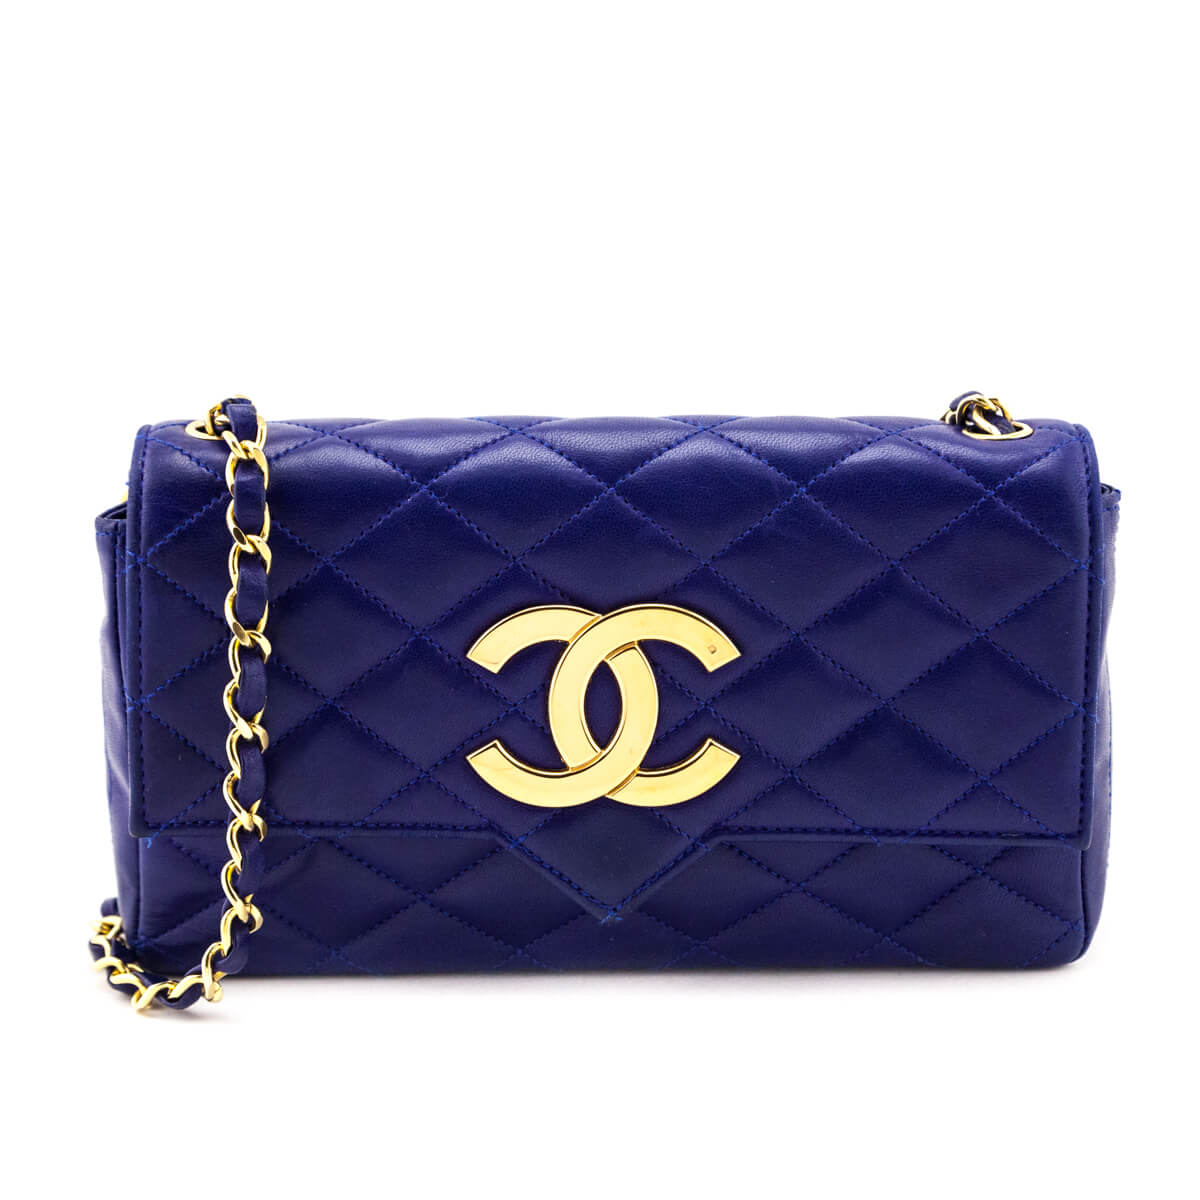 New and Gently Used Chanel Bags, Accessories & Clothing – Page 13